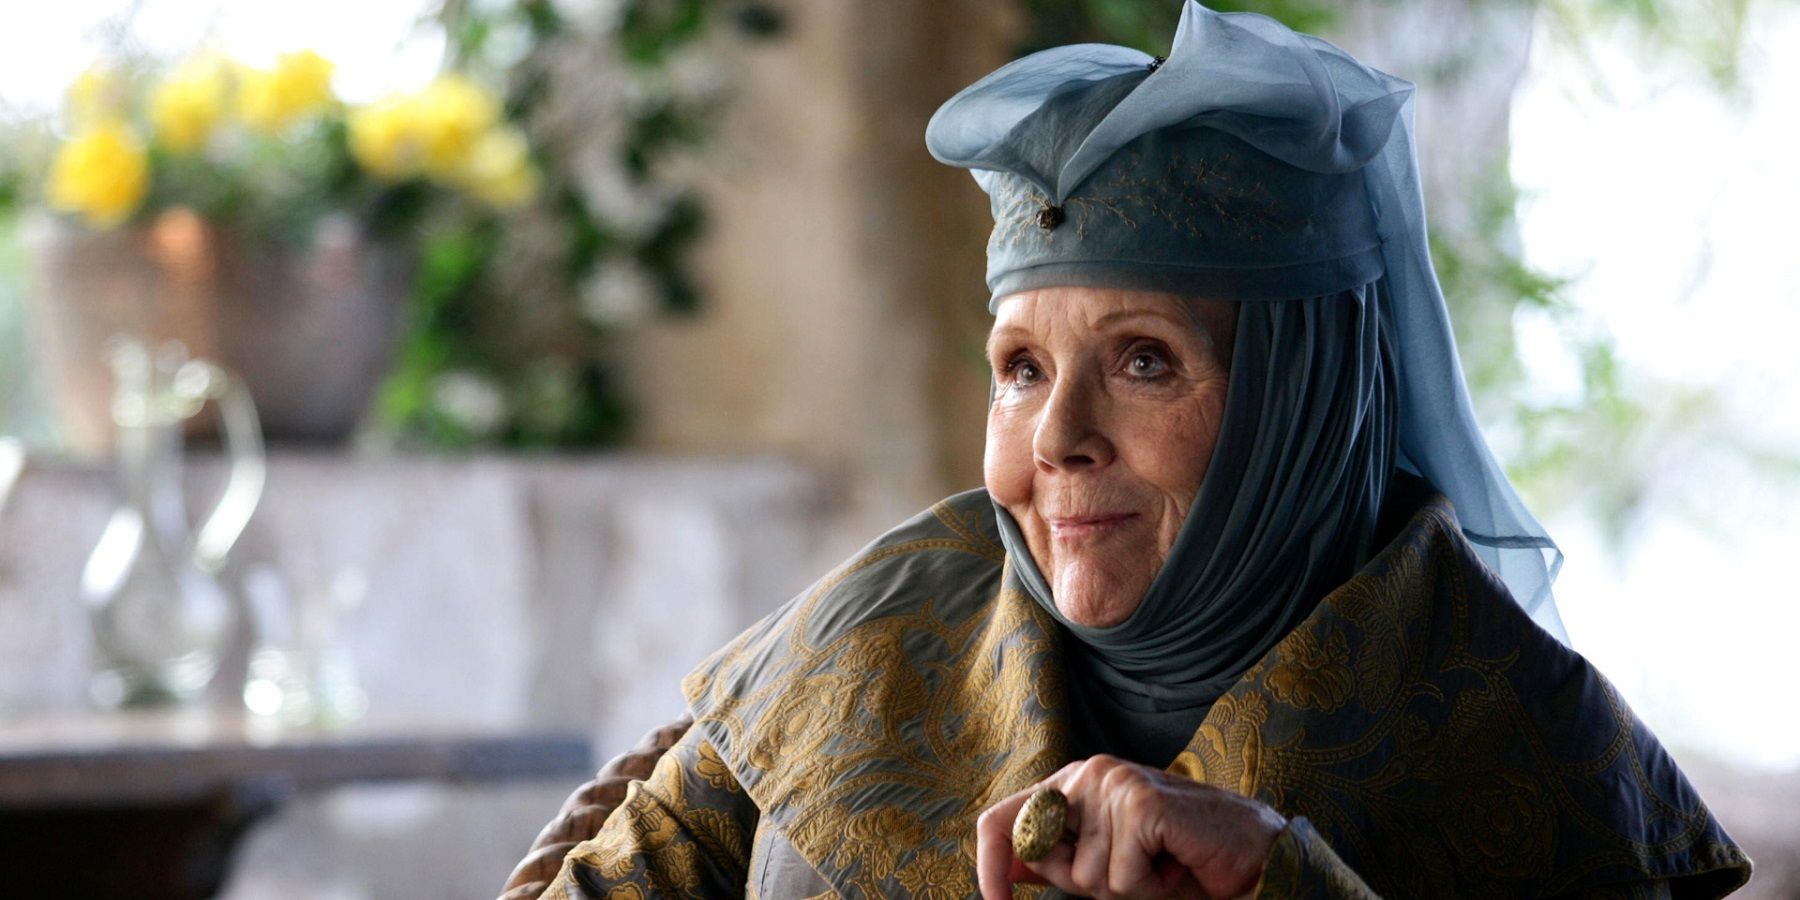 Olenna Tyrell in Game of Thrones